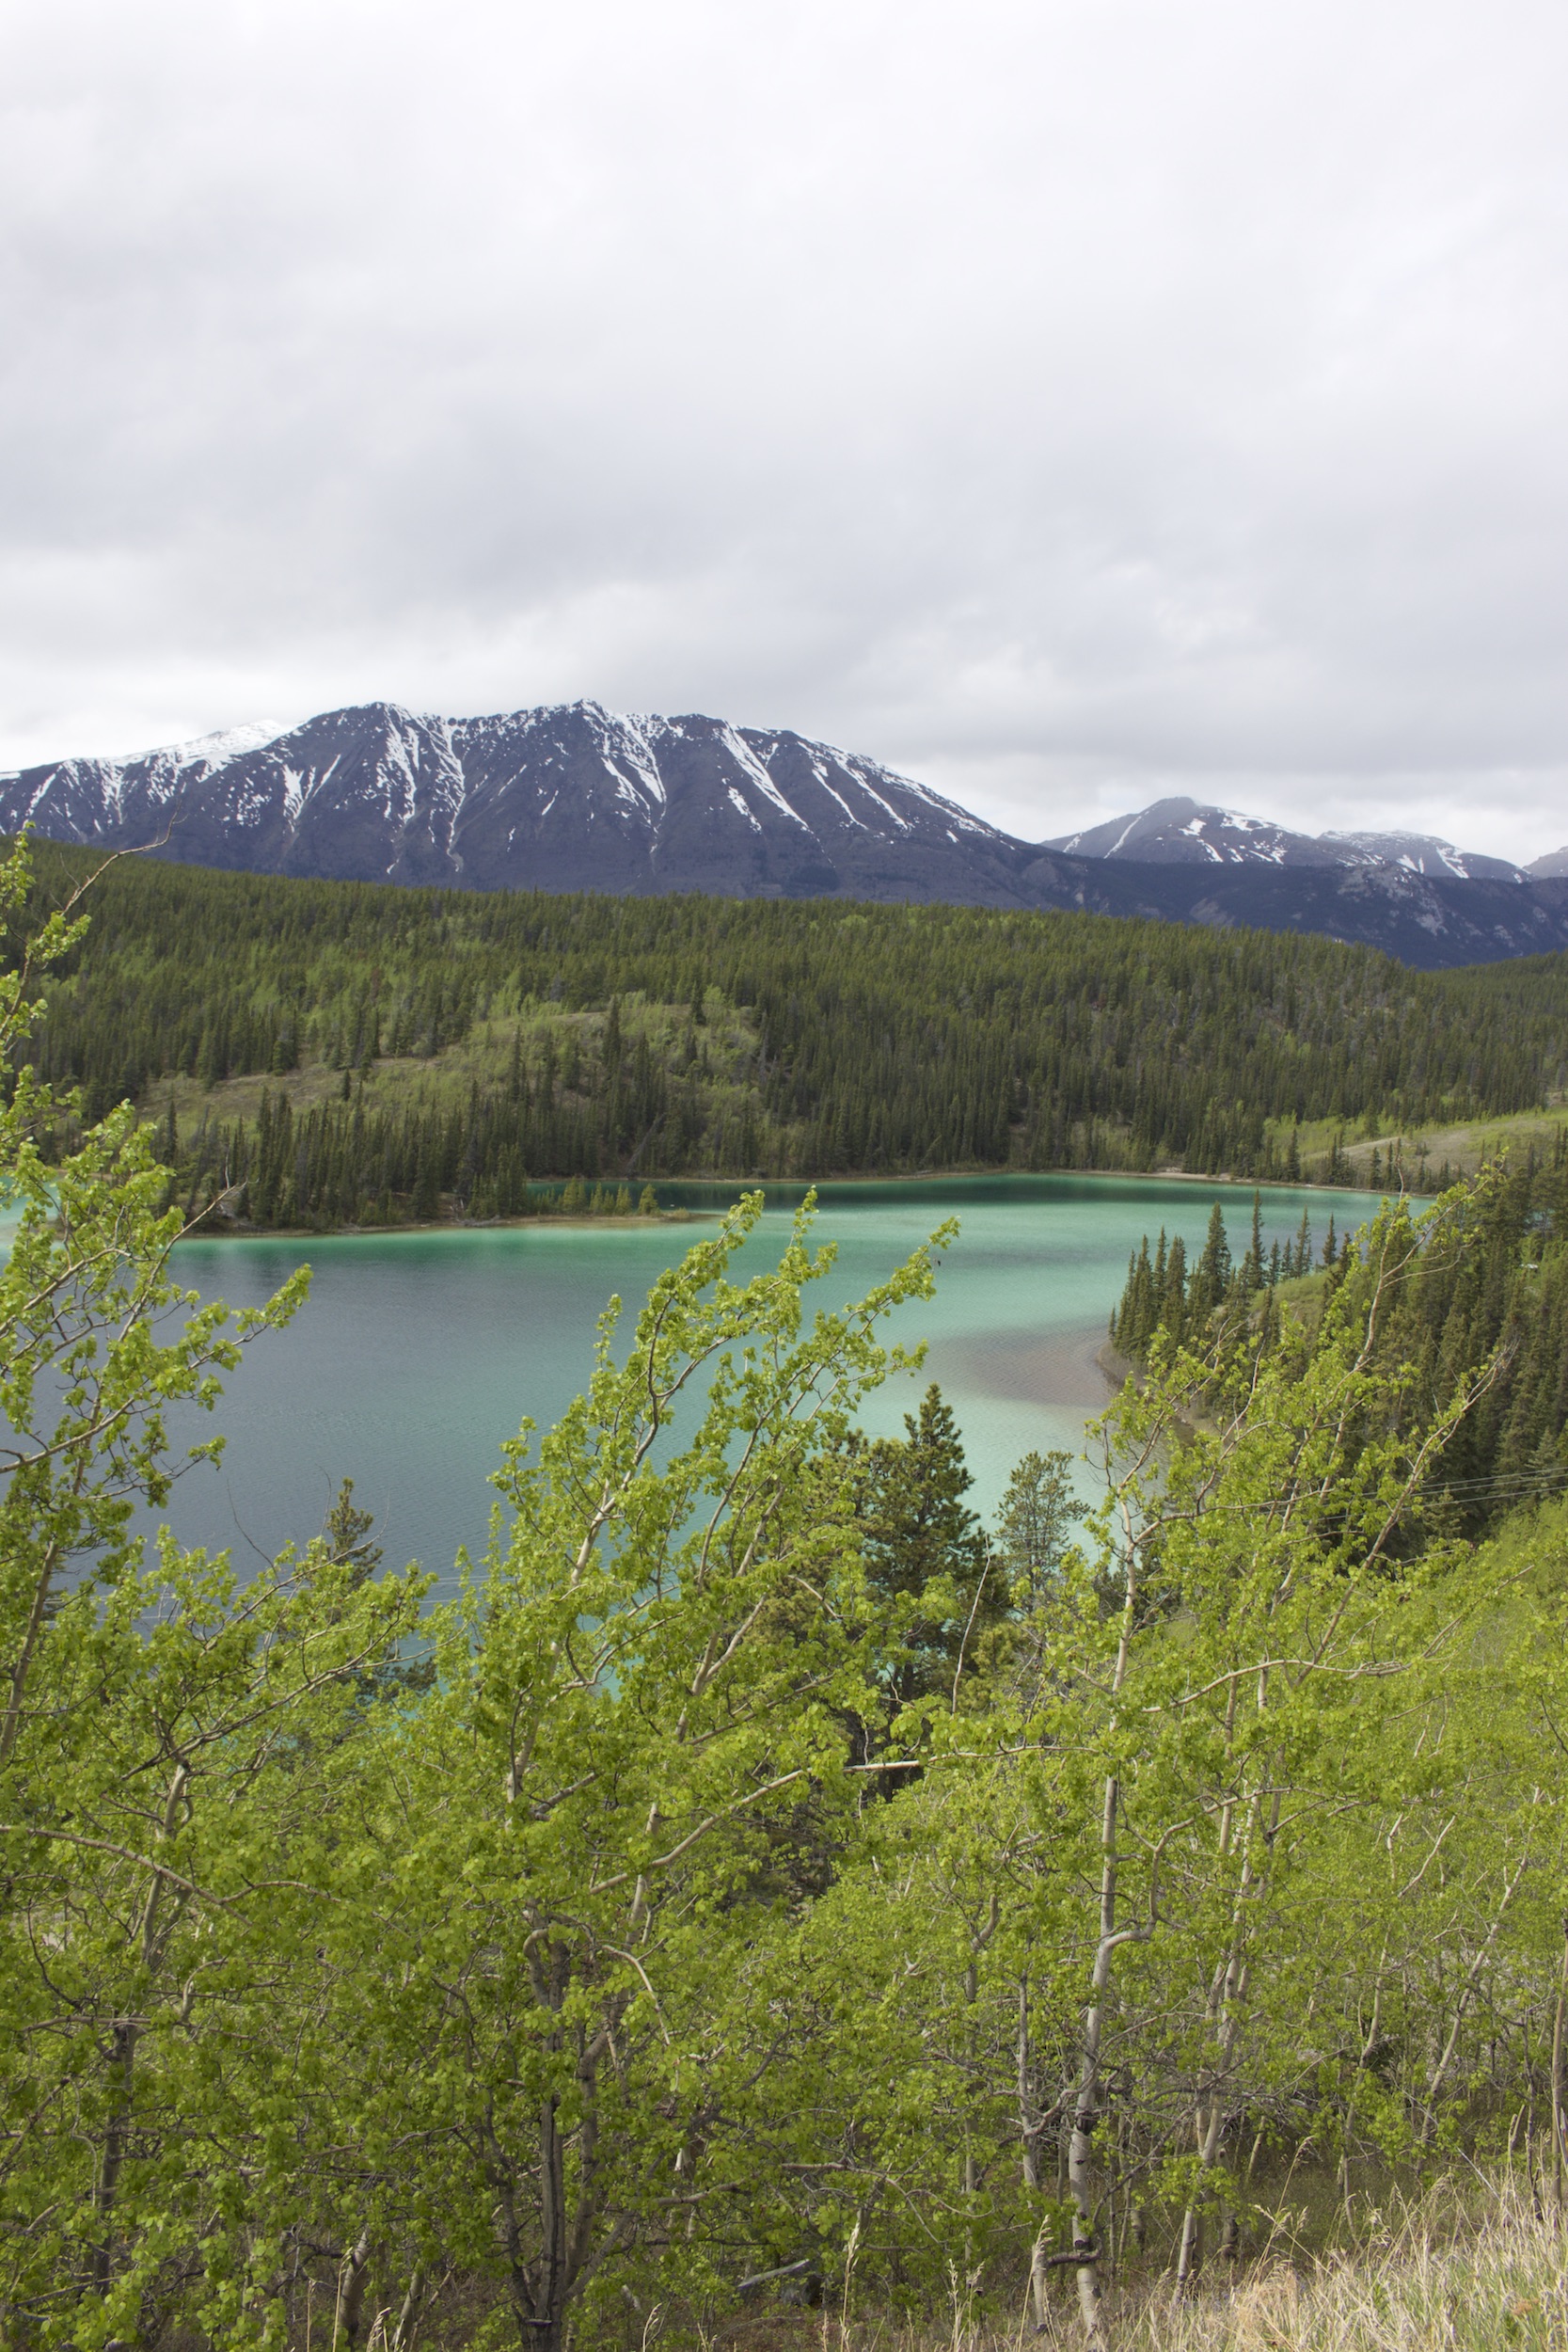 This is Emerald Lake in the Yukon Territory, which is world famous for its green color. It's just past Carcross (short for Caribou Crossing) en route to White Horse.